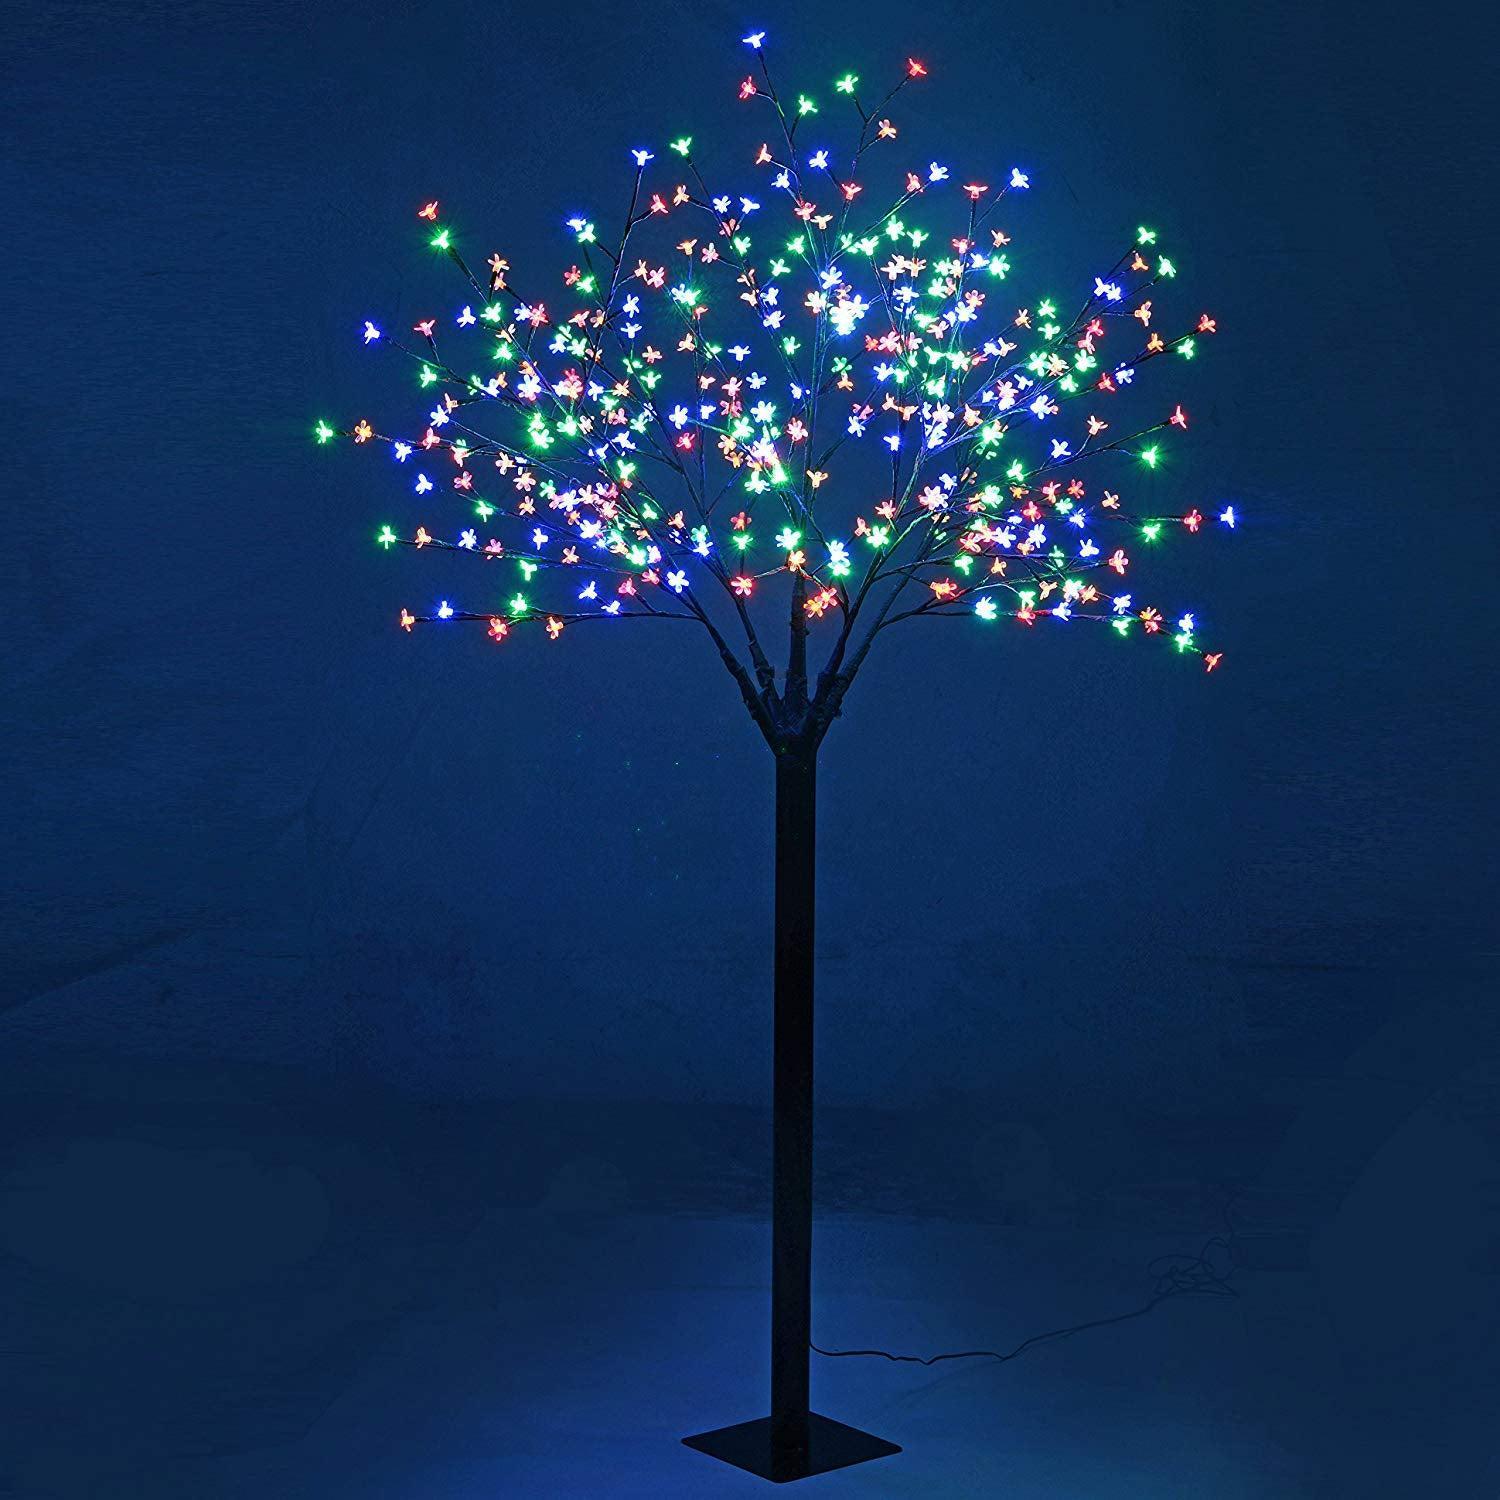 180cm Cherry Blossom 300 LED Cherry Tree Animated Indoor/Outdoor Use - Multi